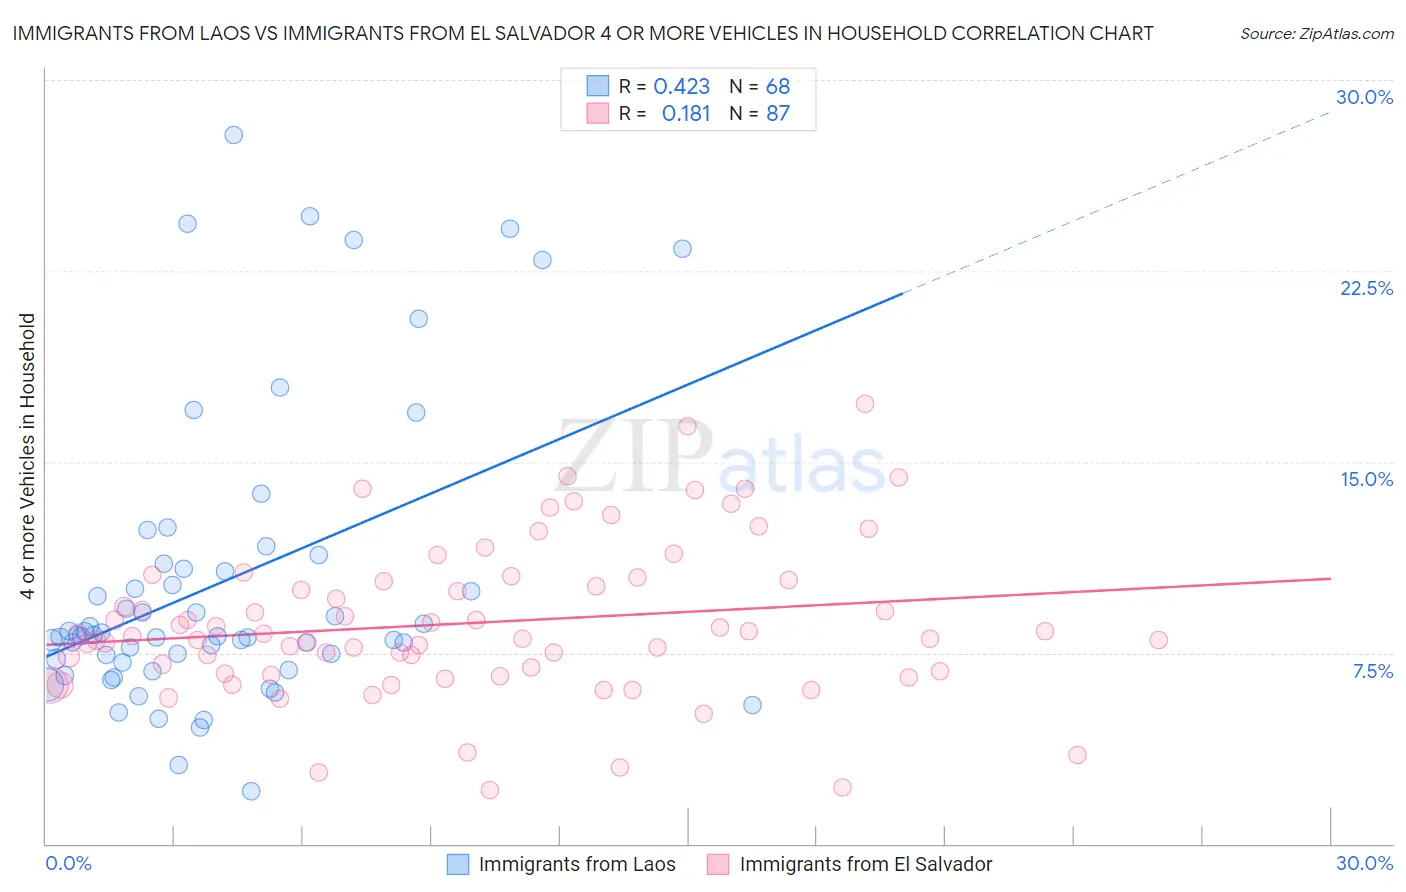 Immigrants from Laos vs Immigrants from El Salvador 4 or more Vehicles in Household